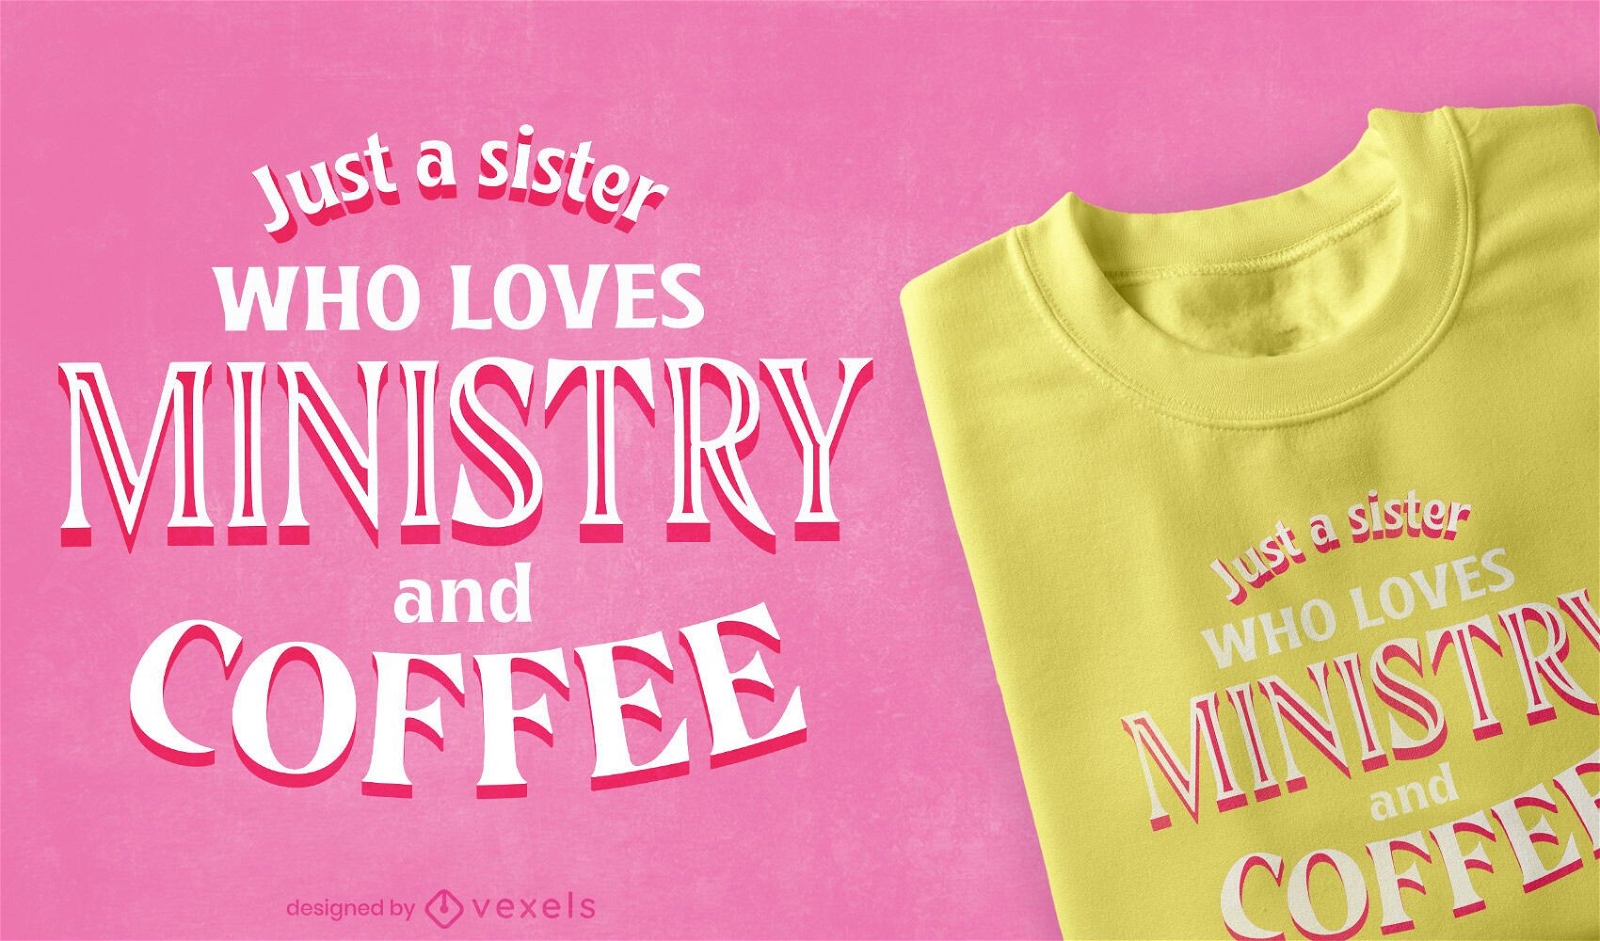 Ministry and coffee quote t-shirt design